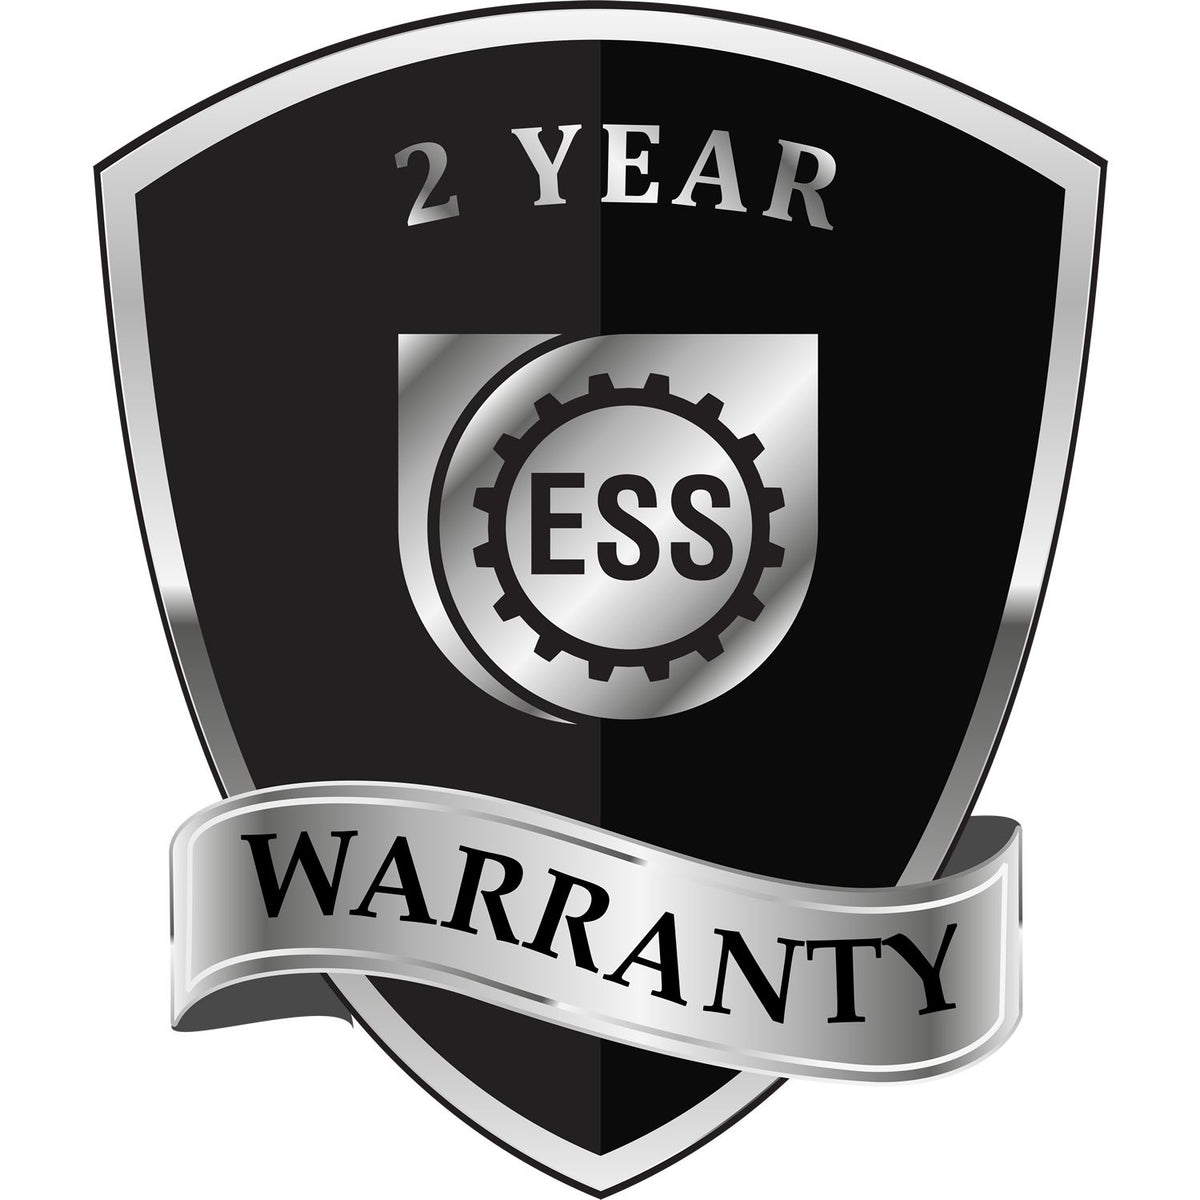 A black and silver badge or emblem showing warranty information for the Gift Arkansas Geologist Seal